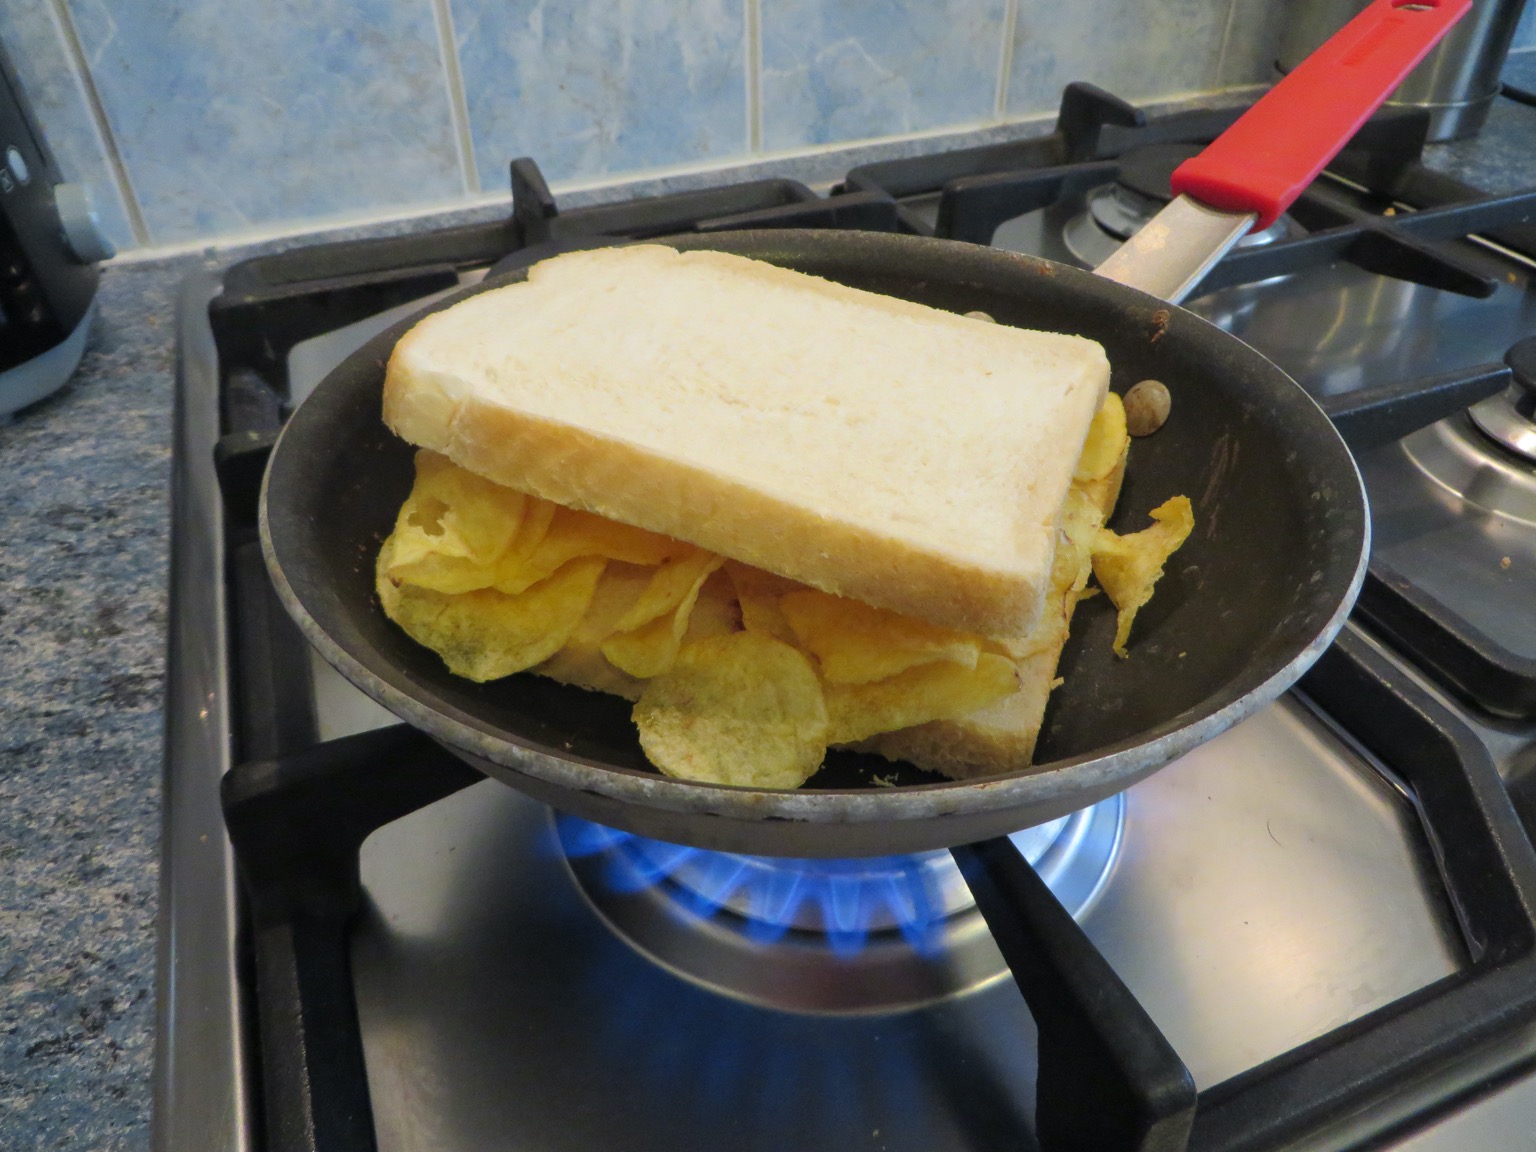 Crisp-filled white sandwich in a pan over flames